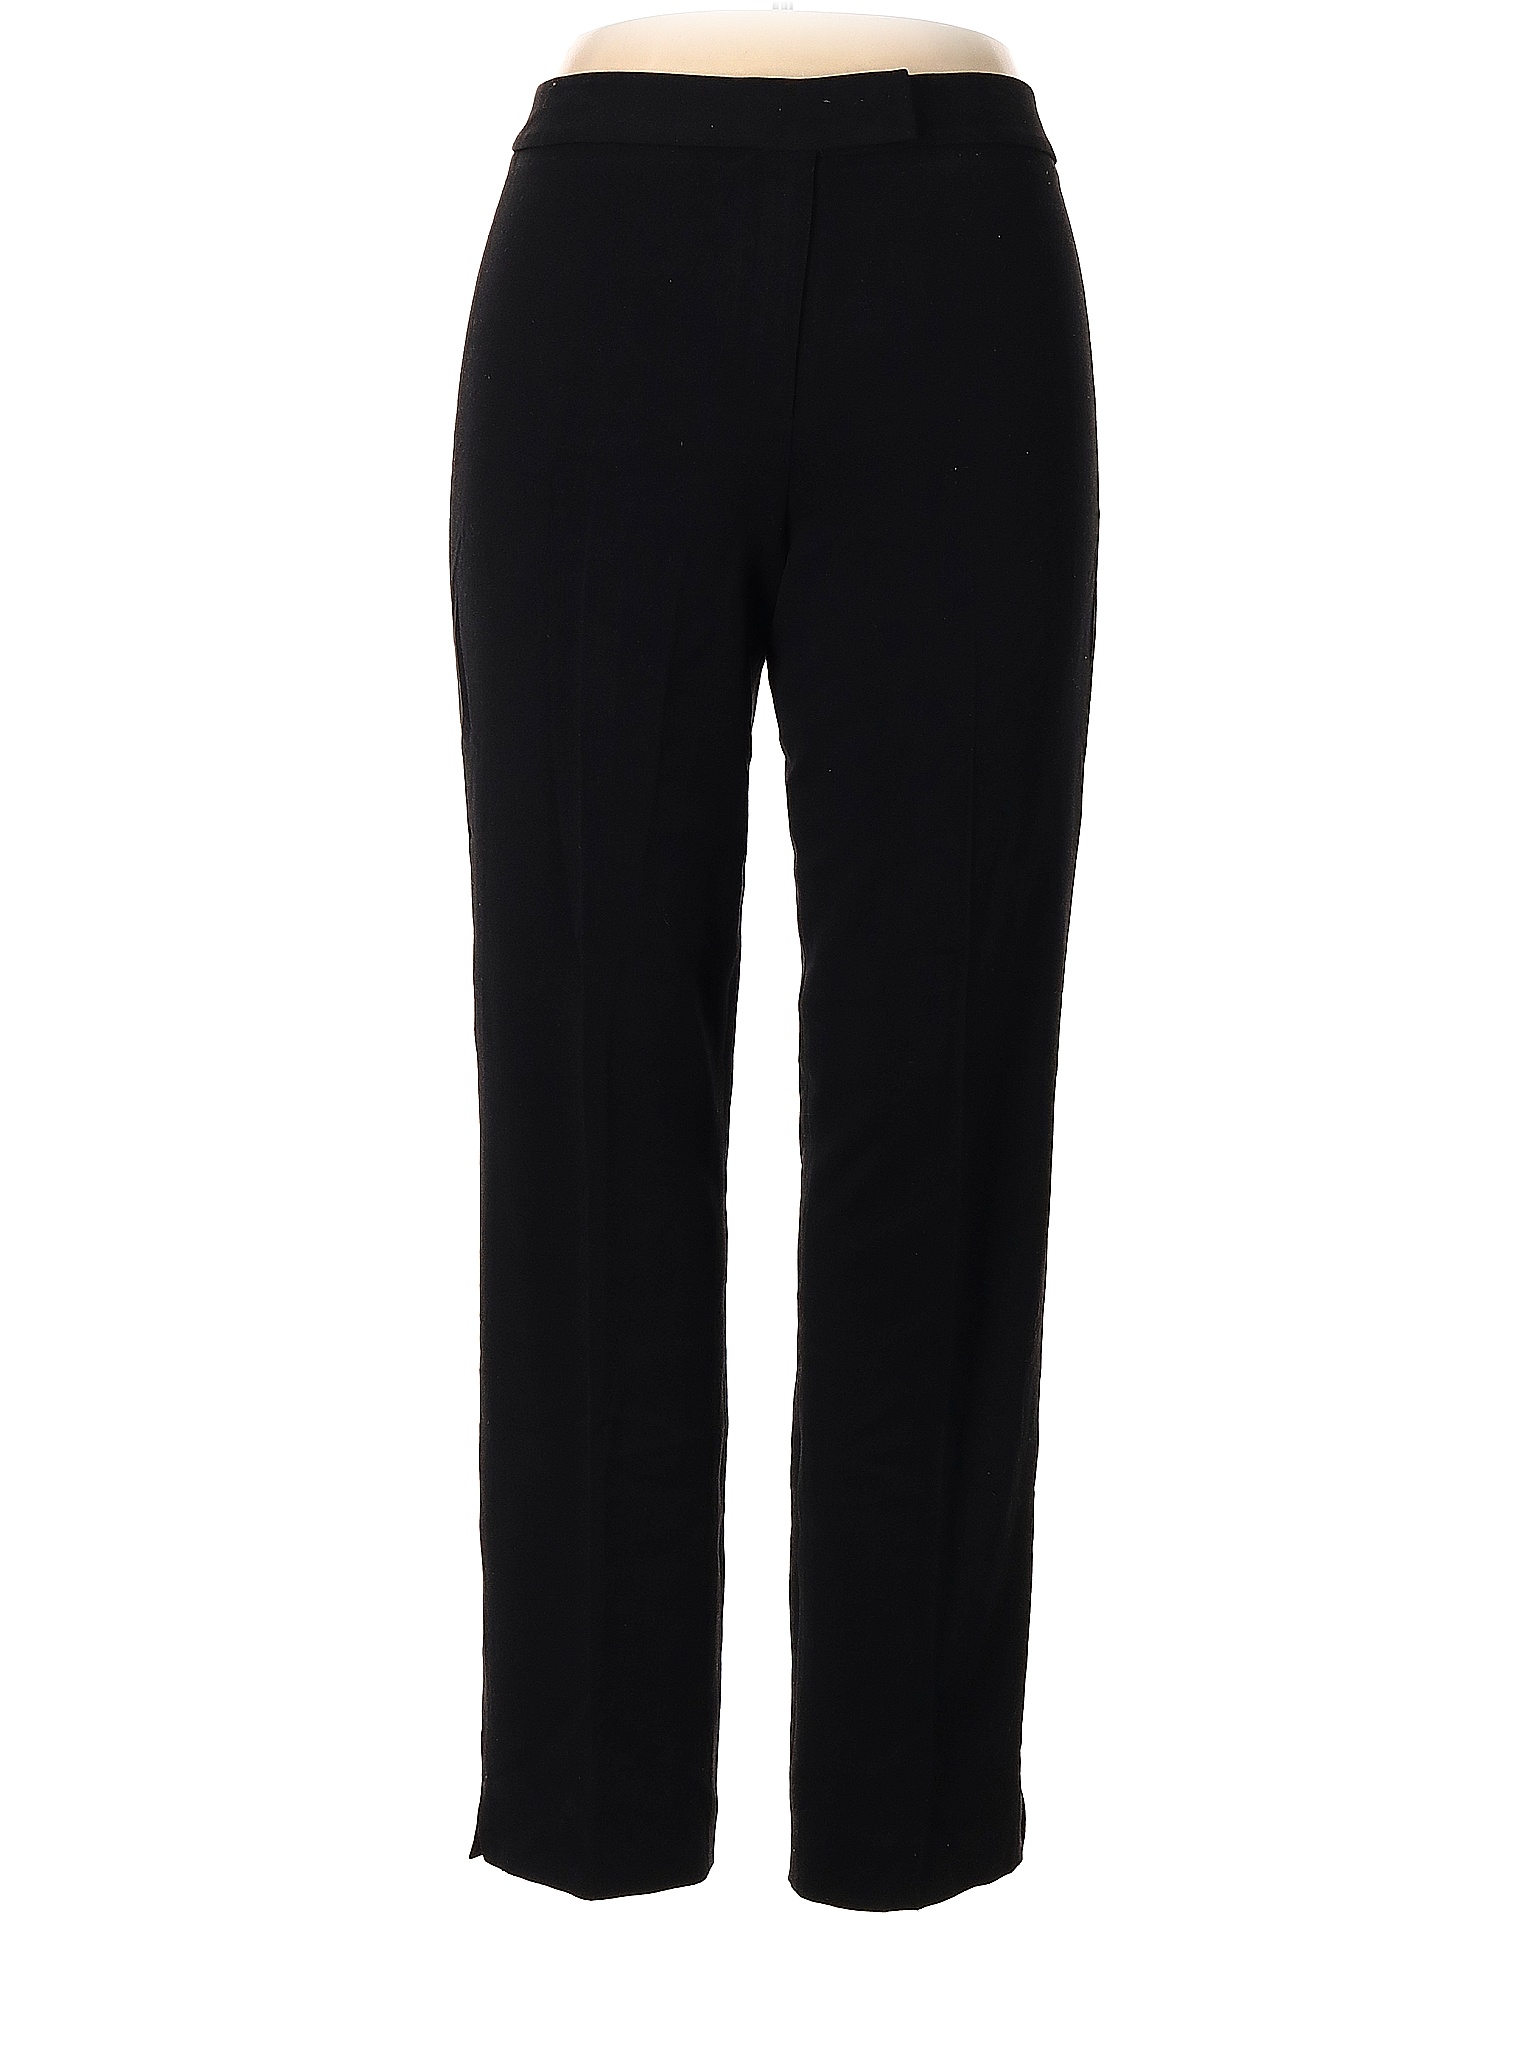 Eric Signature Women's Pants On Sale Up To 90% Off Retail | thredUP